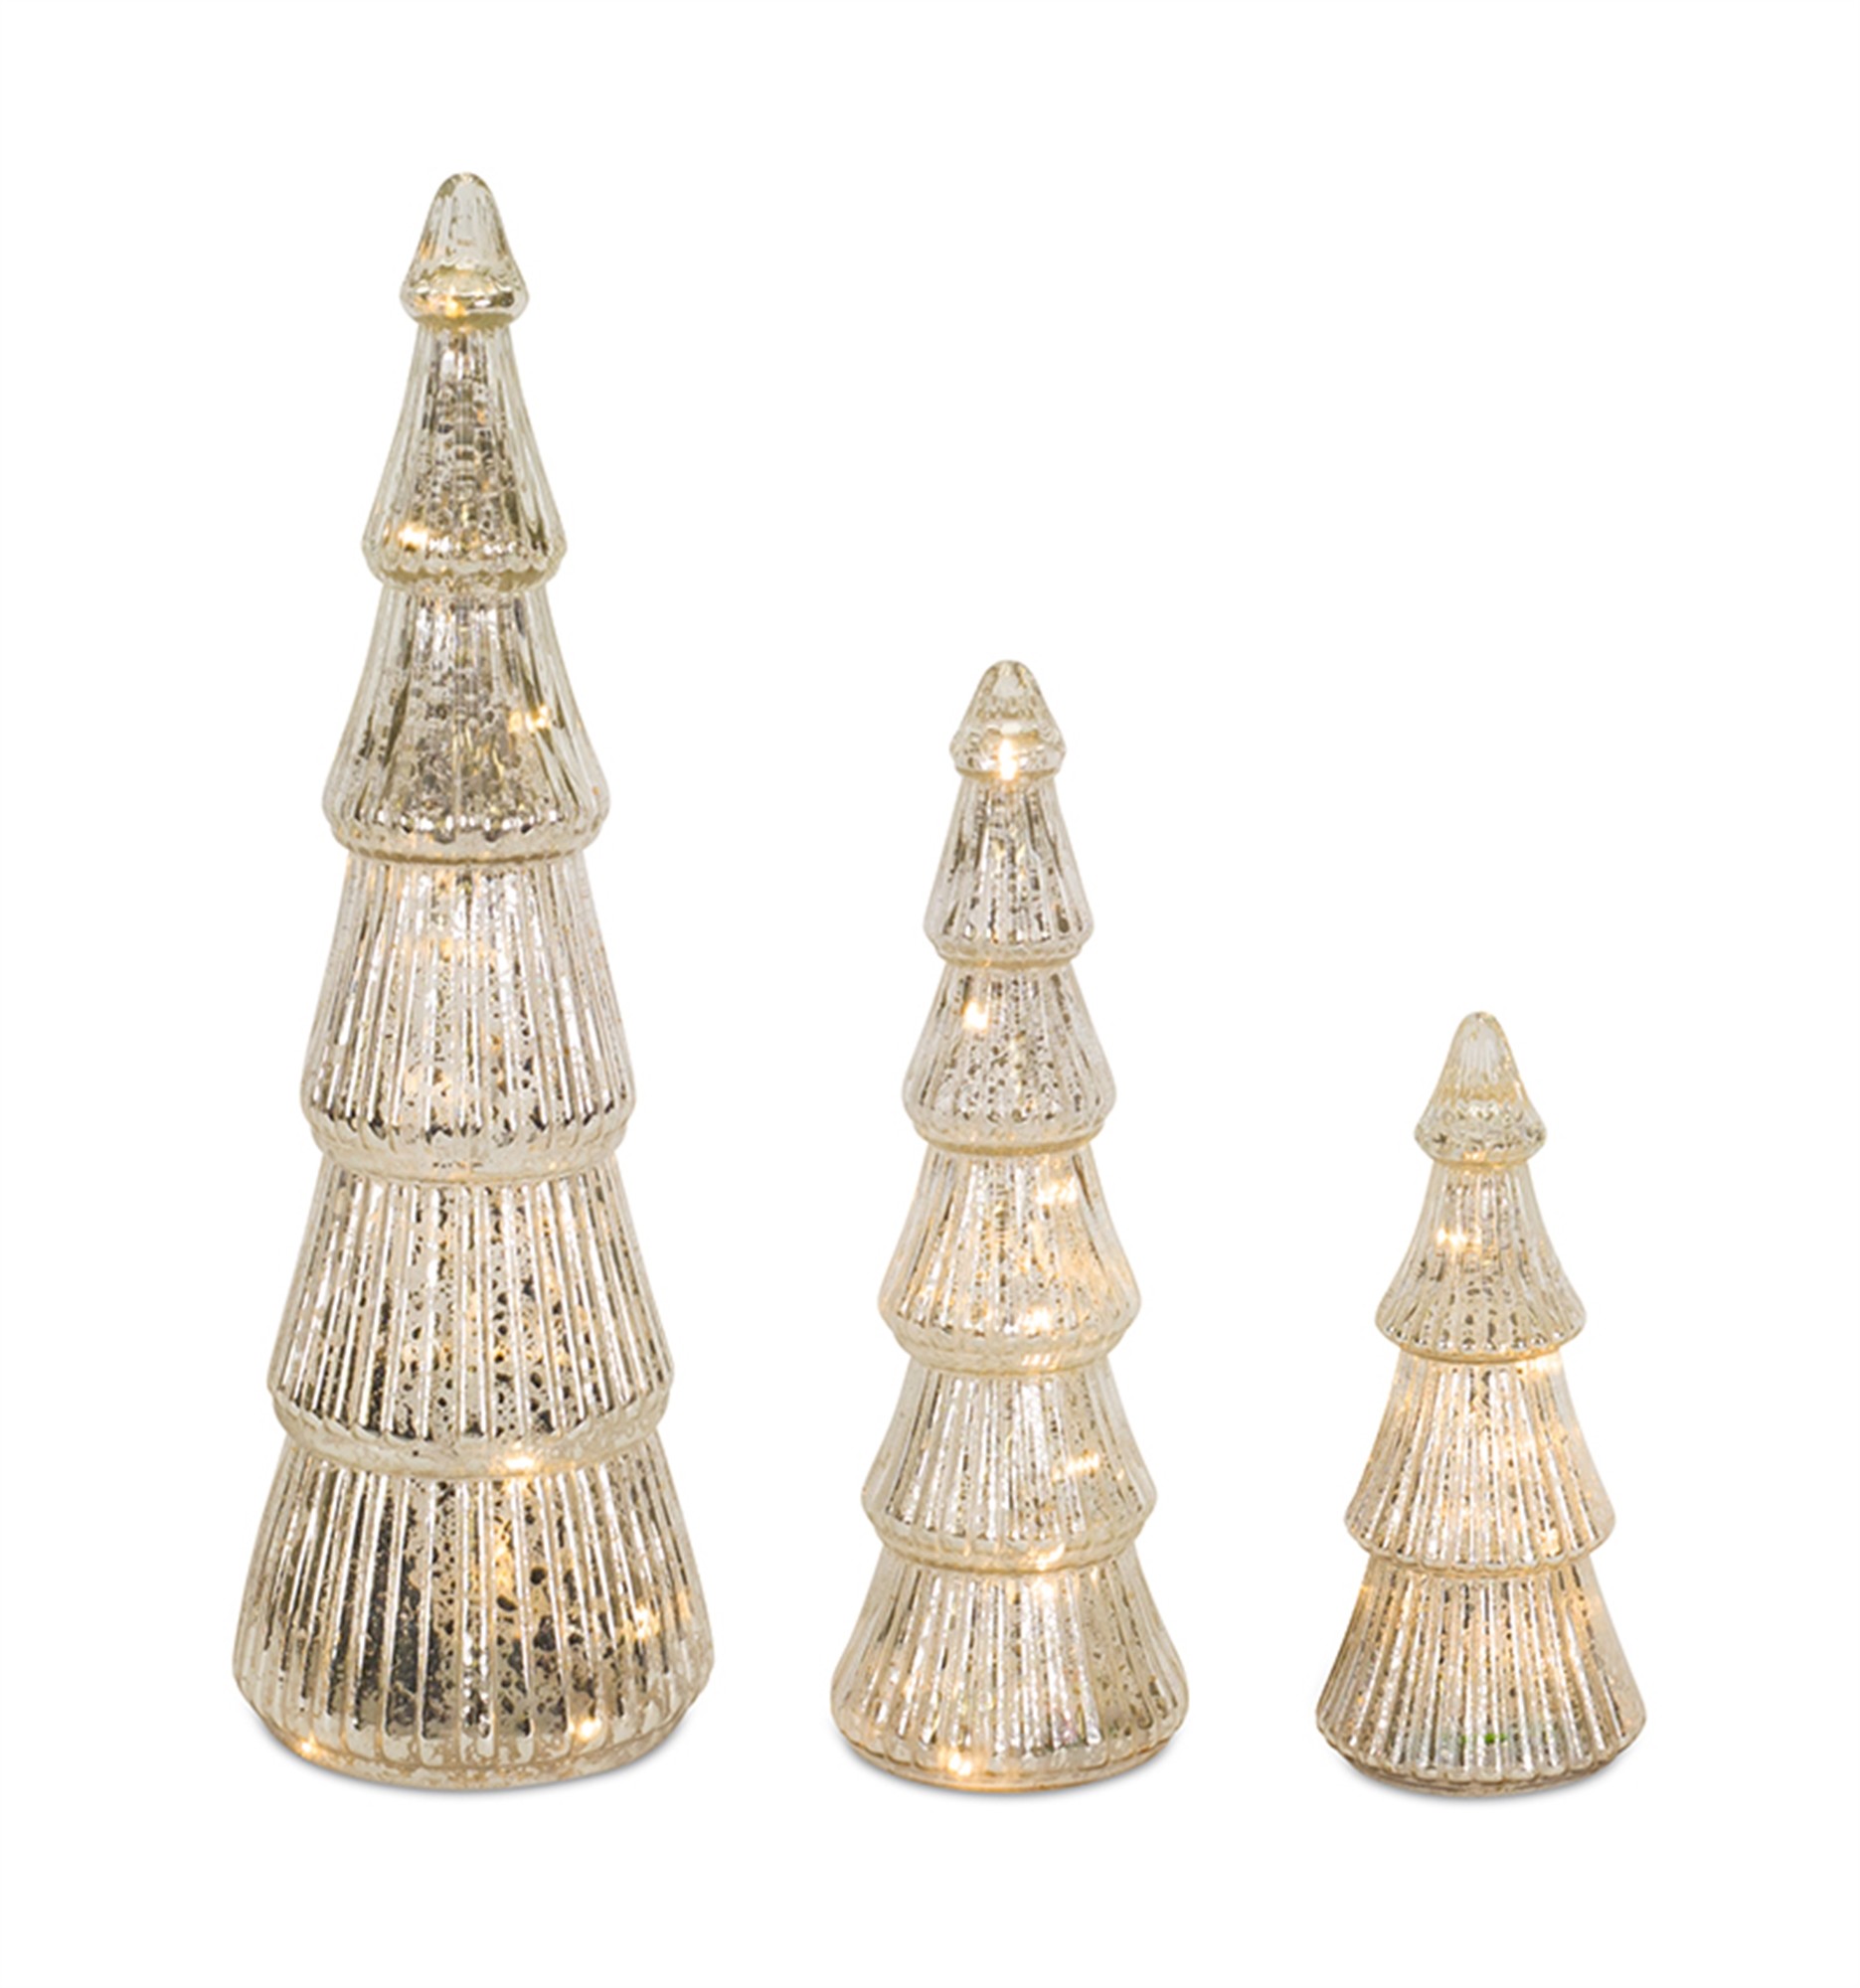 Tabletop Tree (Set of 3) 10"H, 14"H, 19"H Glass